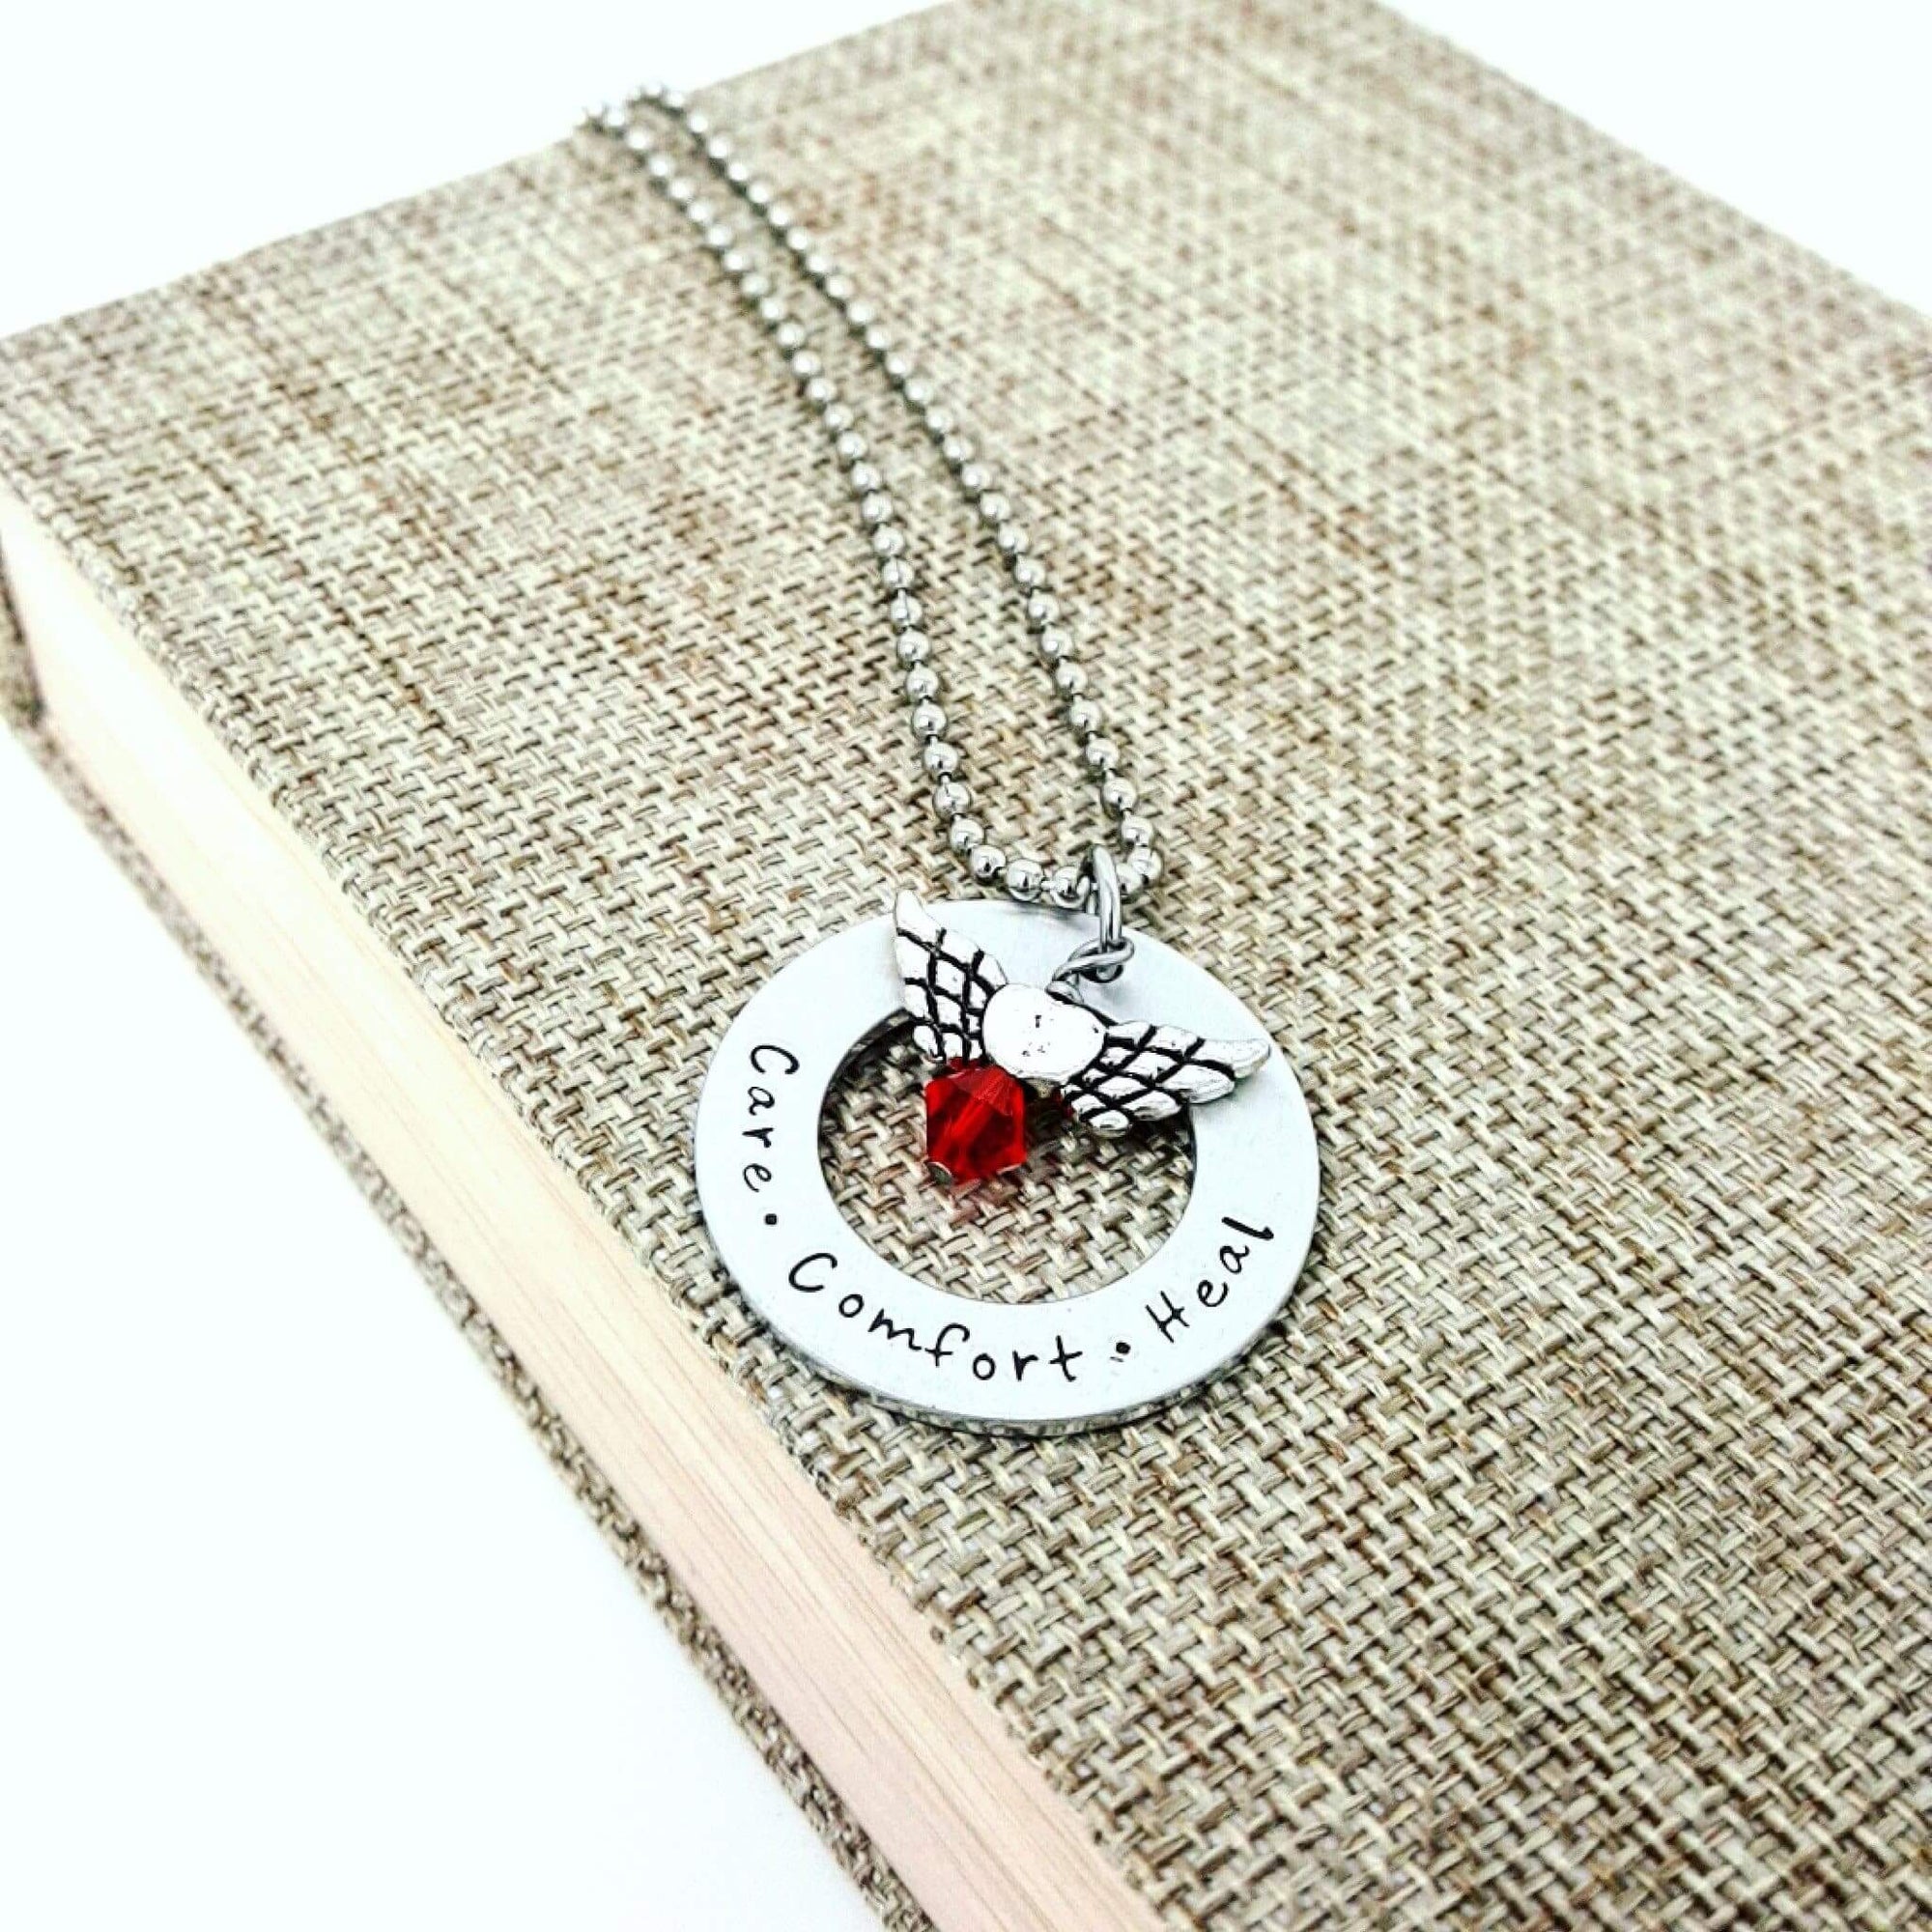 Care Comfort Heal - Nurse Necklace, Doctor, RN, Medical Field, Live Love Heal Neckace, Necklaces, HandmadeLoveStories, HandmadeLoveStories , [Handmade_Love_Stories], [Hand_Stamped_Jewelry], [Etsy_Stamped_Jewelry], [Etsy_Jewelry]